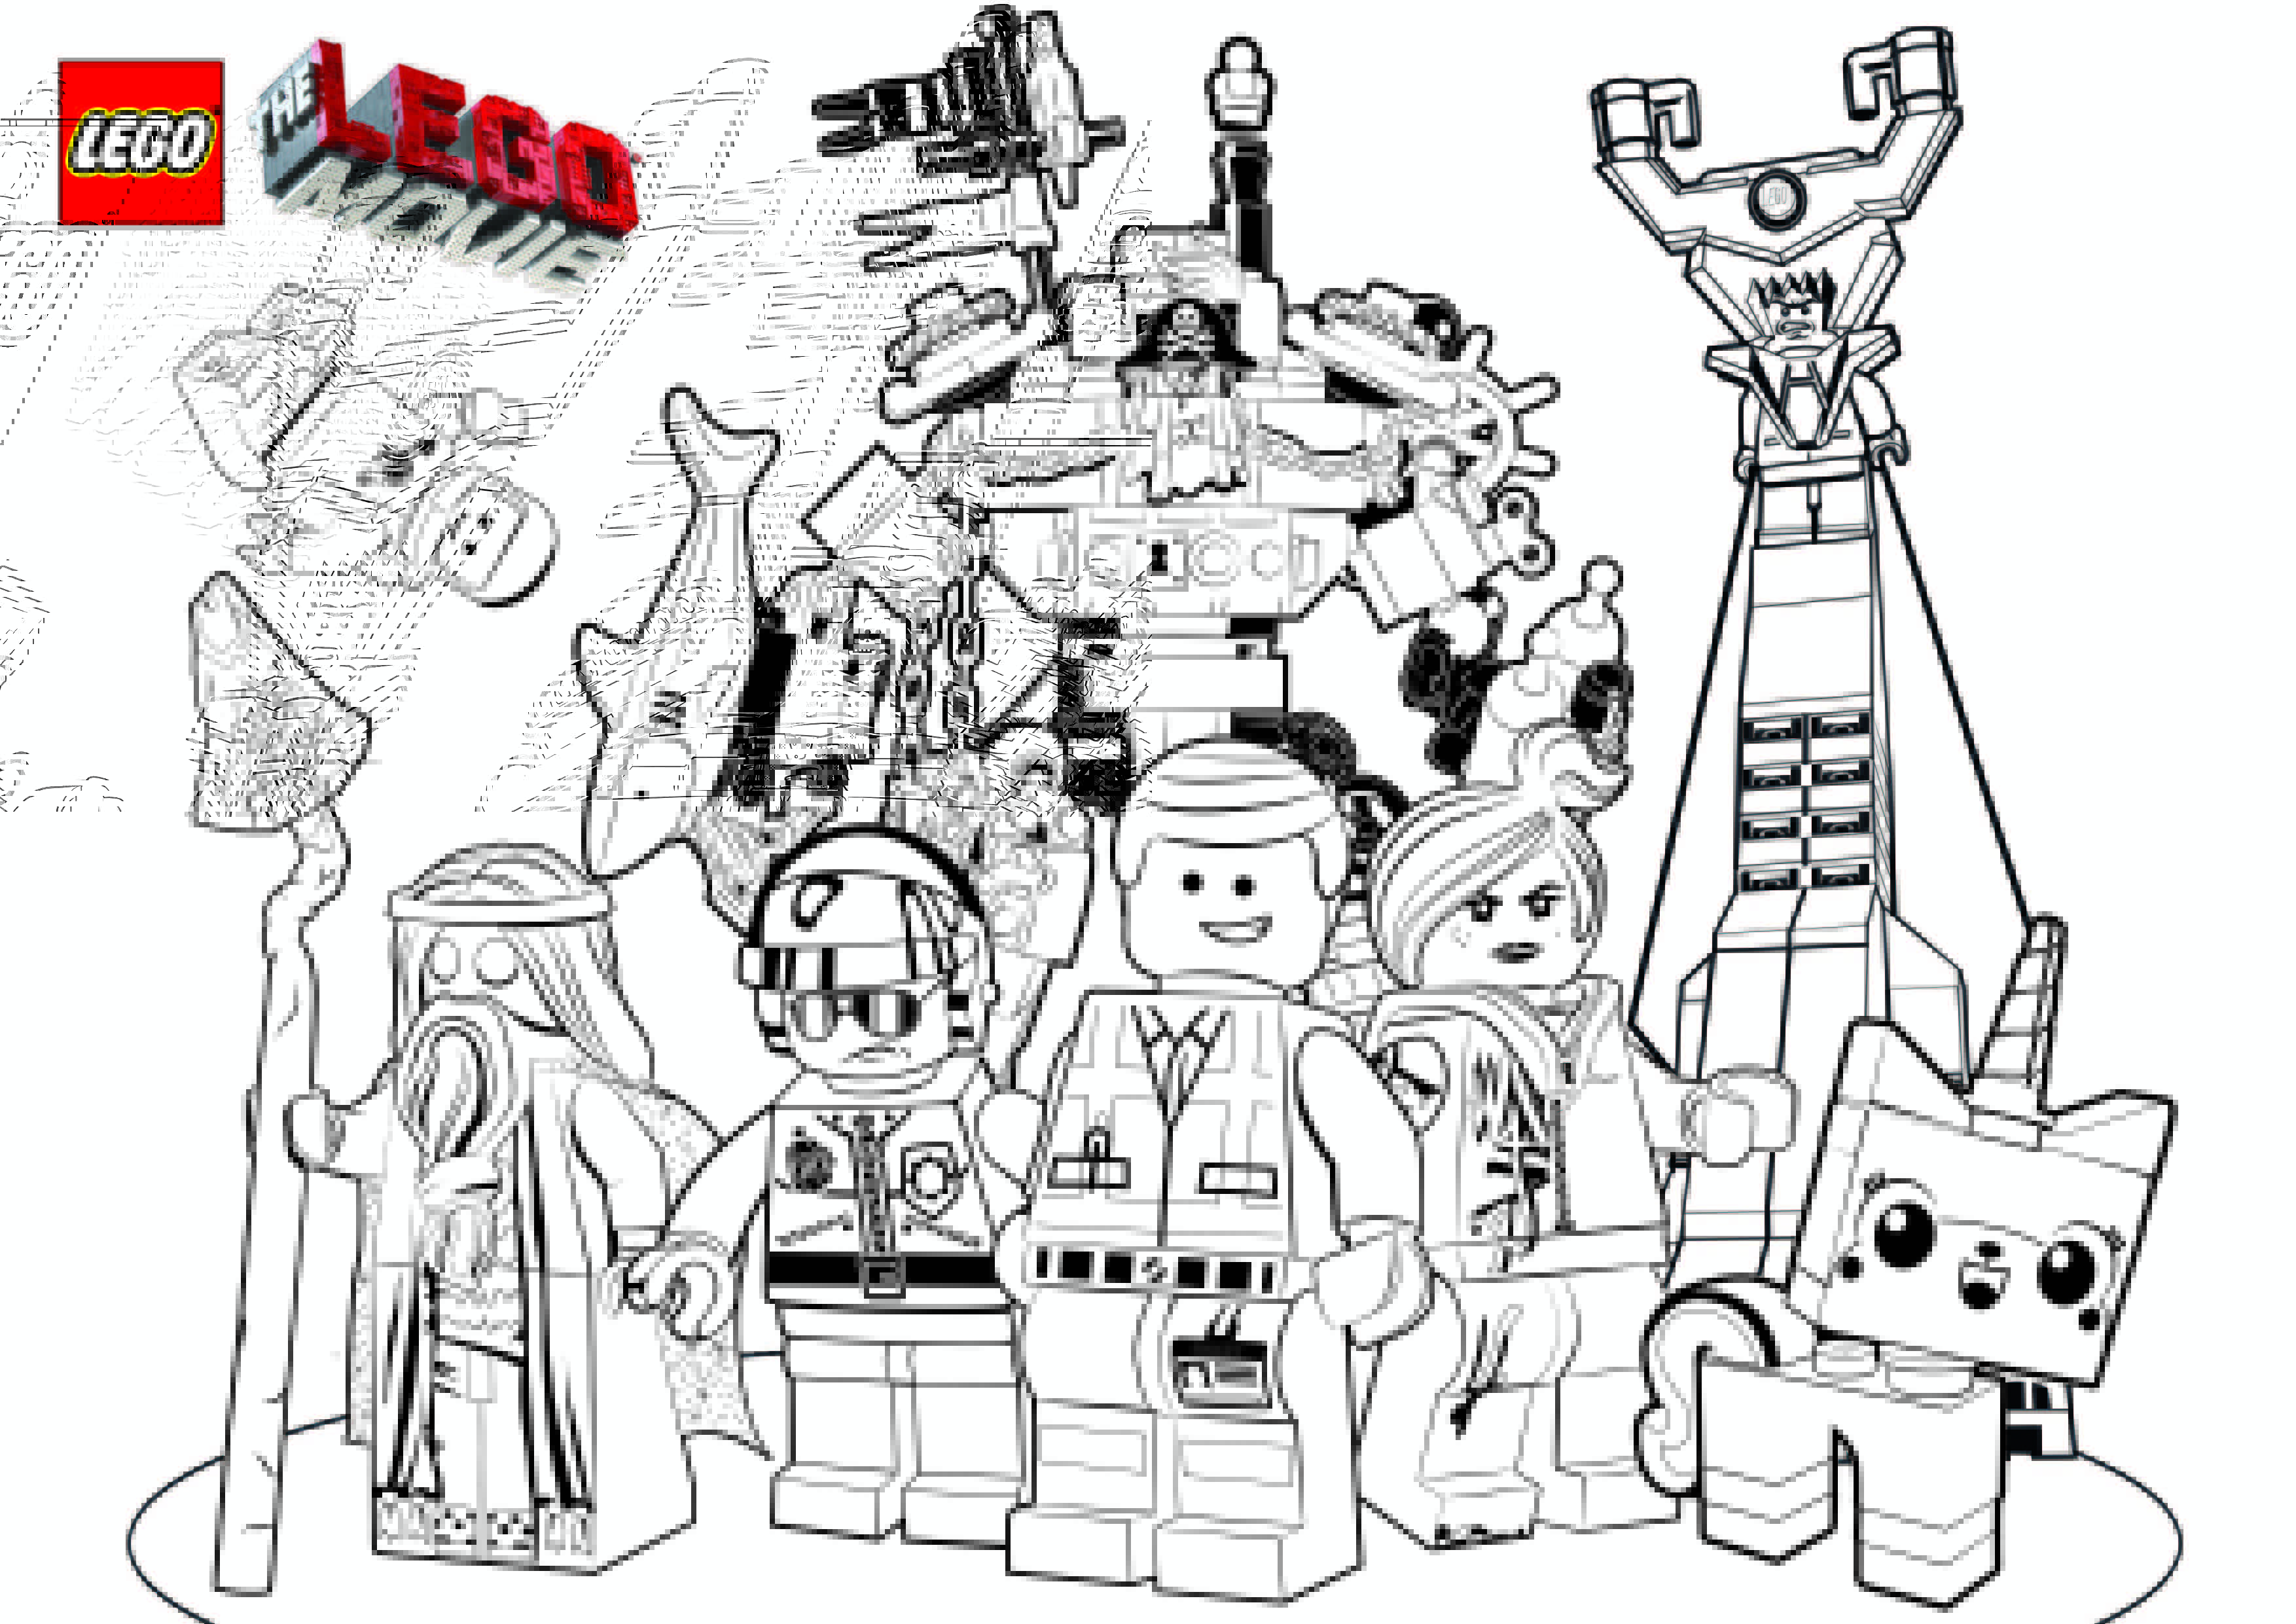 lego-coloring-pages-best-coloring-pages-for-kids